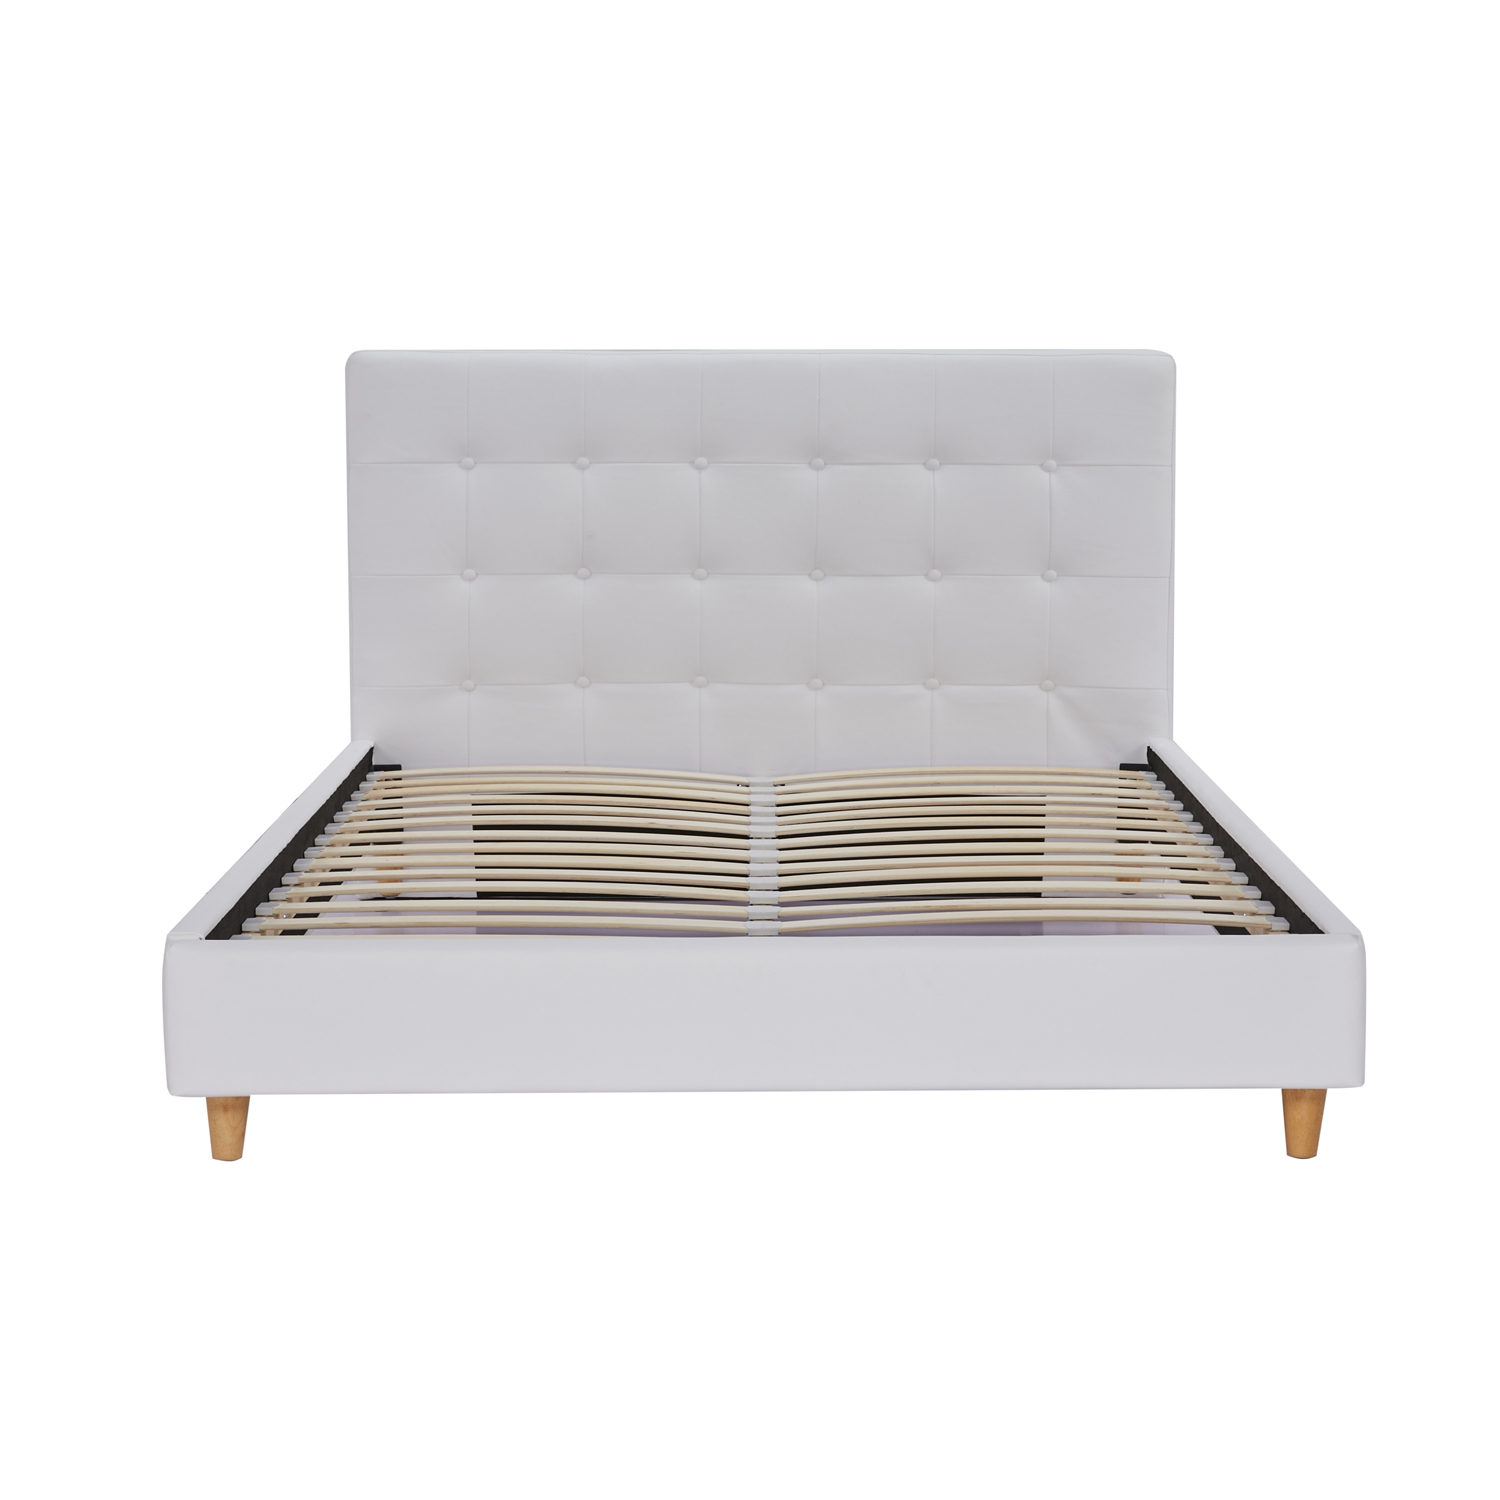 Lamden Tufted Bed Queen (White Faux Leather) - Furniture Source Philippines